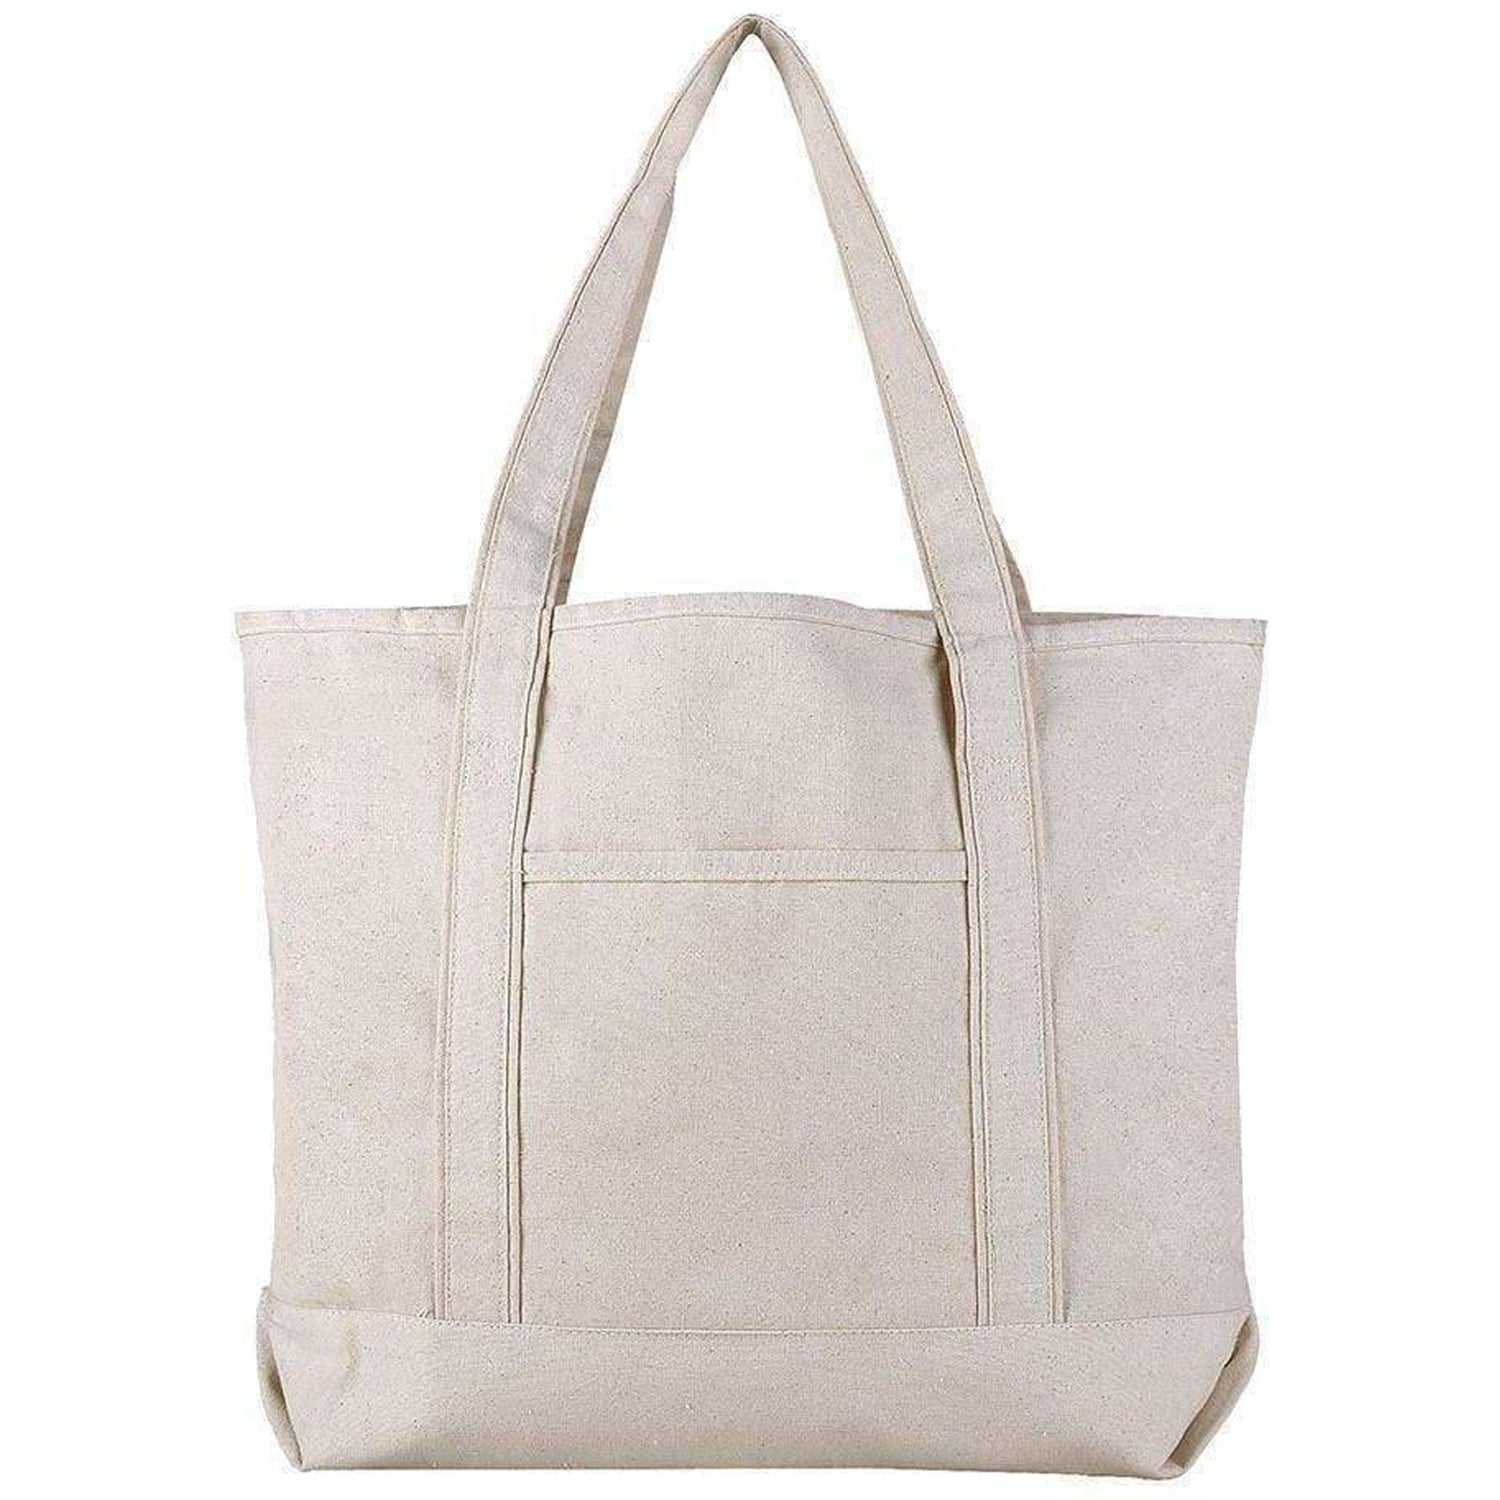 Extra Large Canvas Tote Bags Wholesale - Bulk Canvas Boat Tote Bags ...